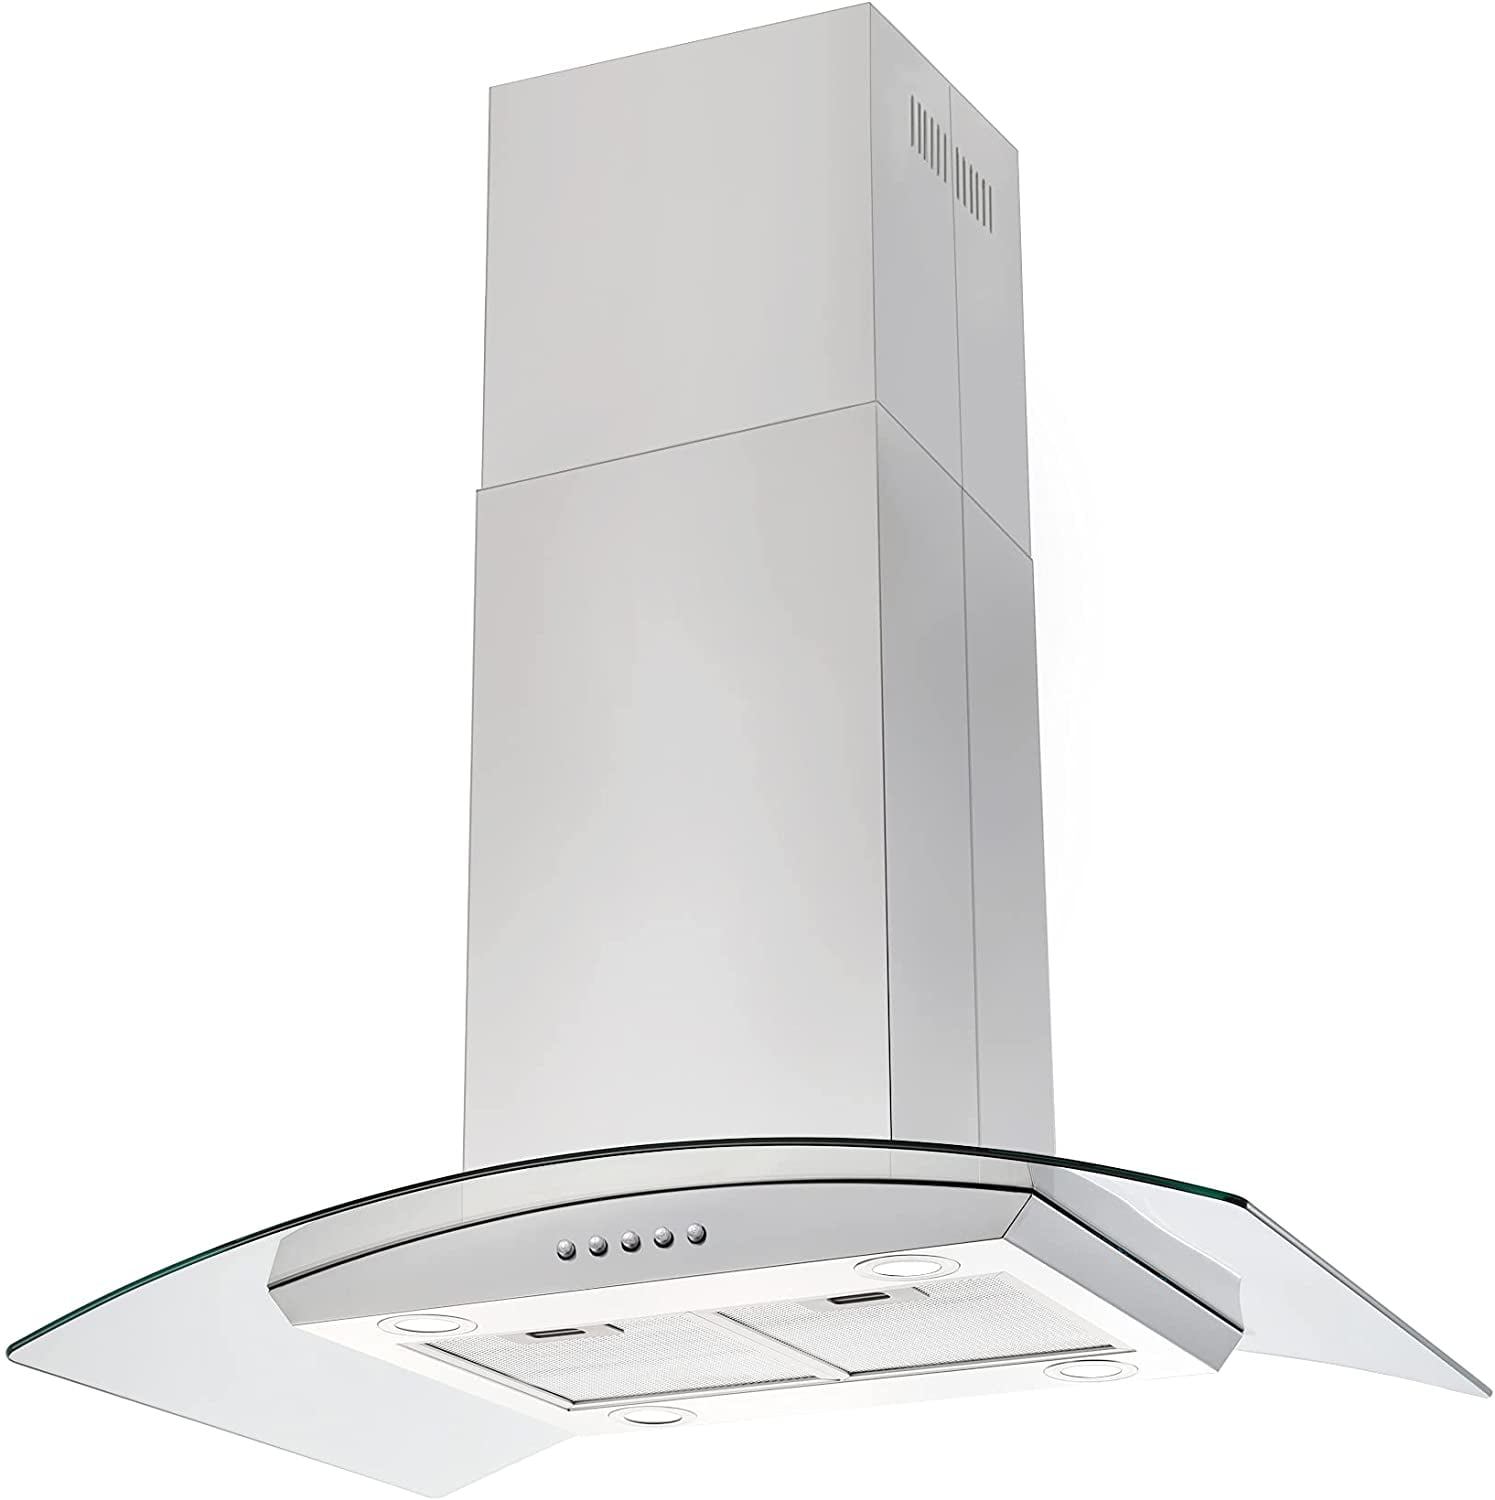 Tieasy Wall Mount Range Hood 30 inch with Ducted/Ductless Convertible Duct,  Stainless Steel Chimney-Style Over Stove Vent Hood with LED Light, 3 Speed  Exhaust Fan, 450 CFM